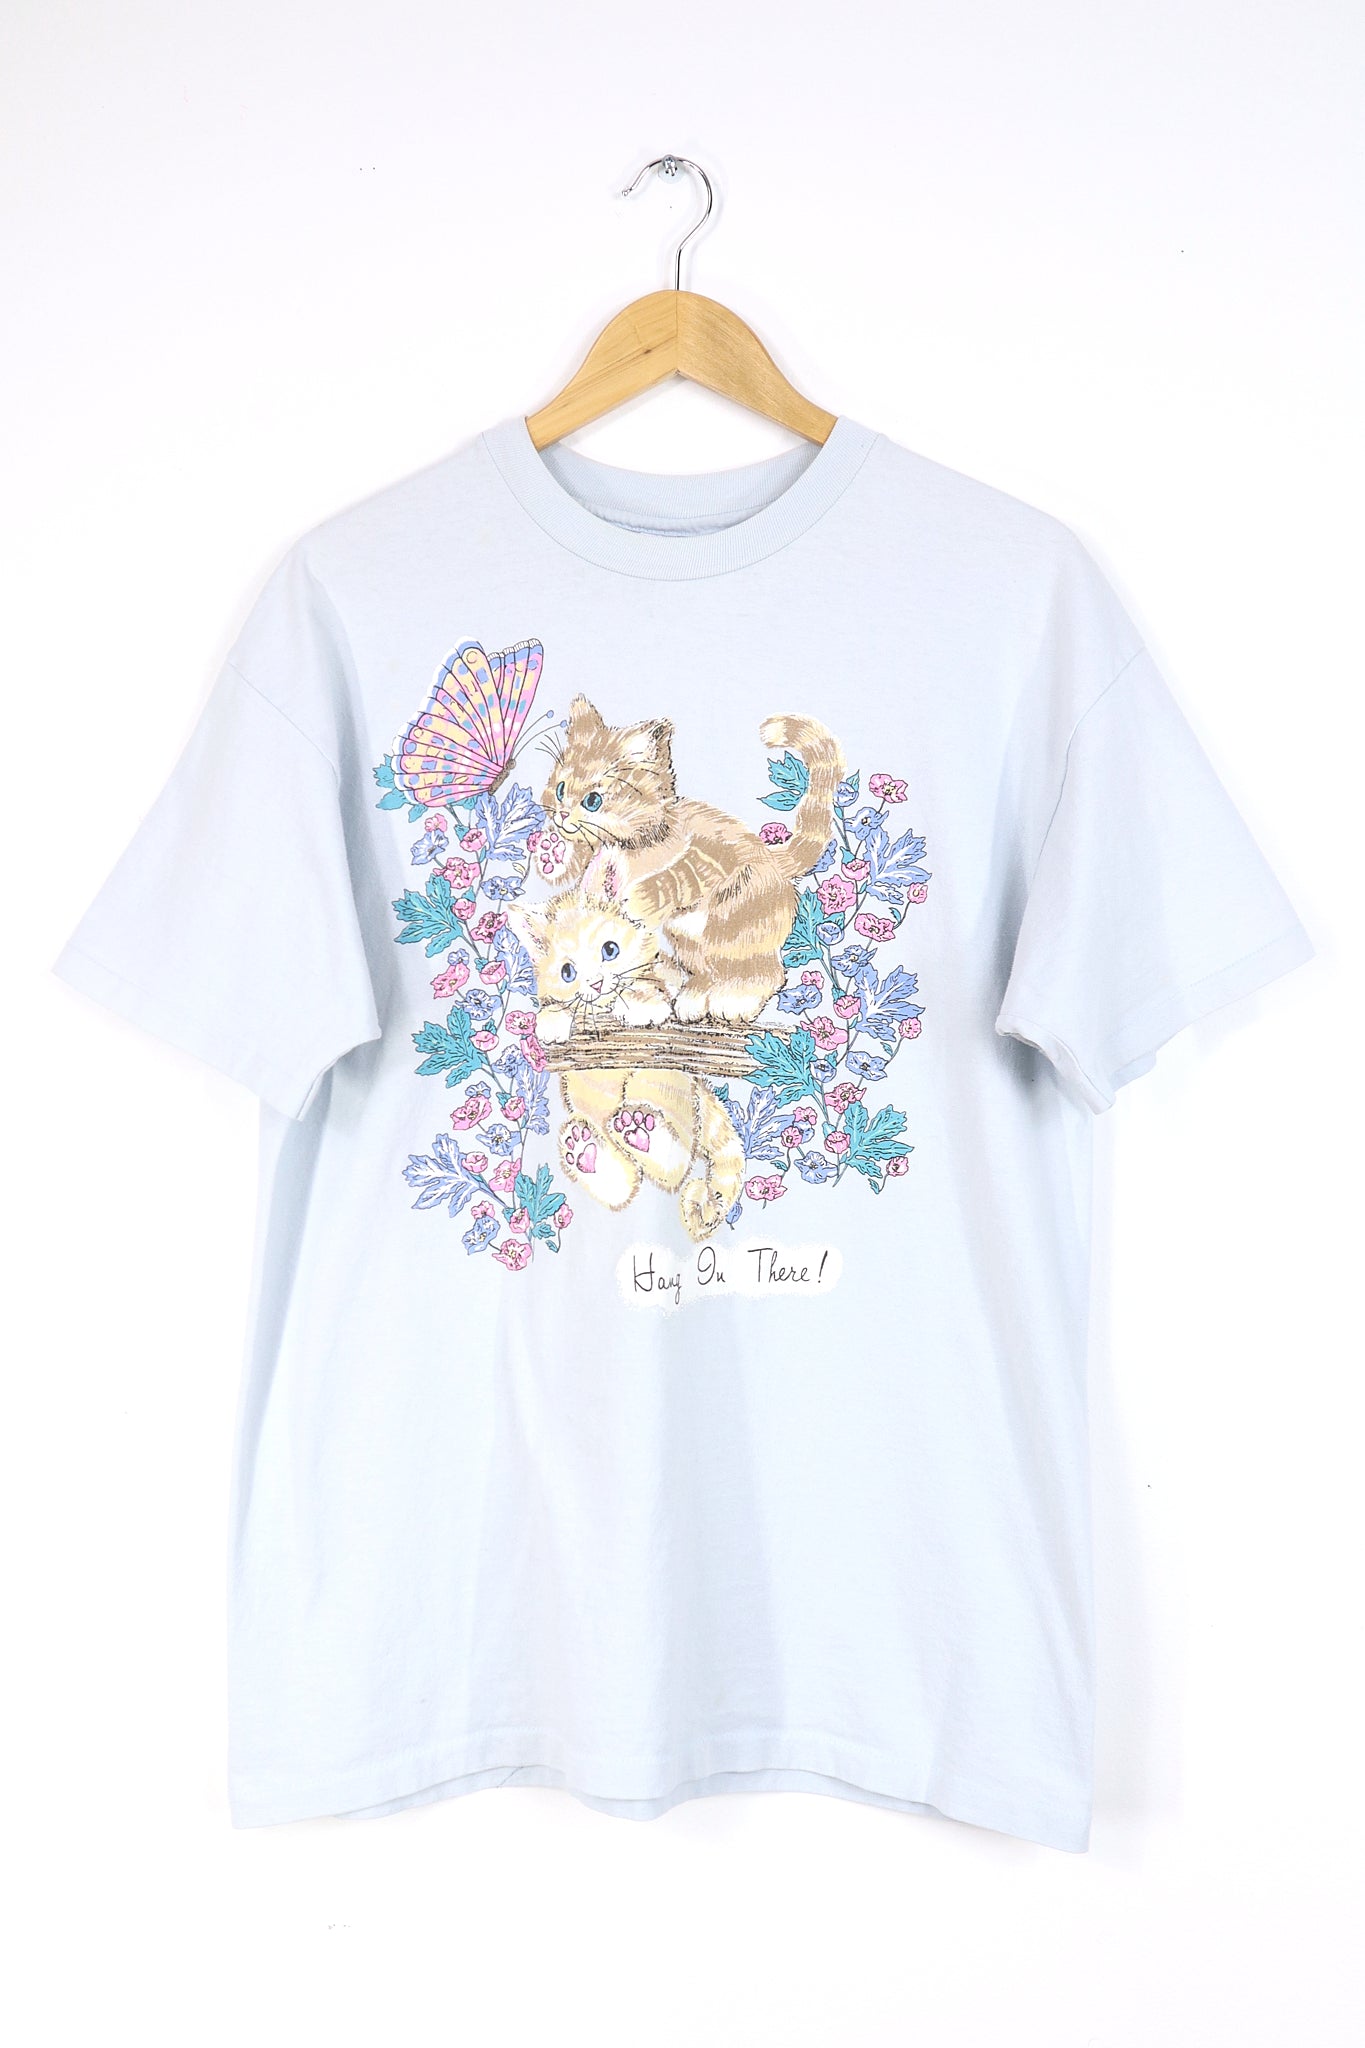 Vintage Cats Hang in There Tee